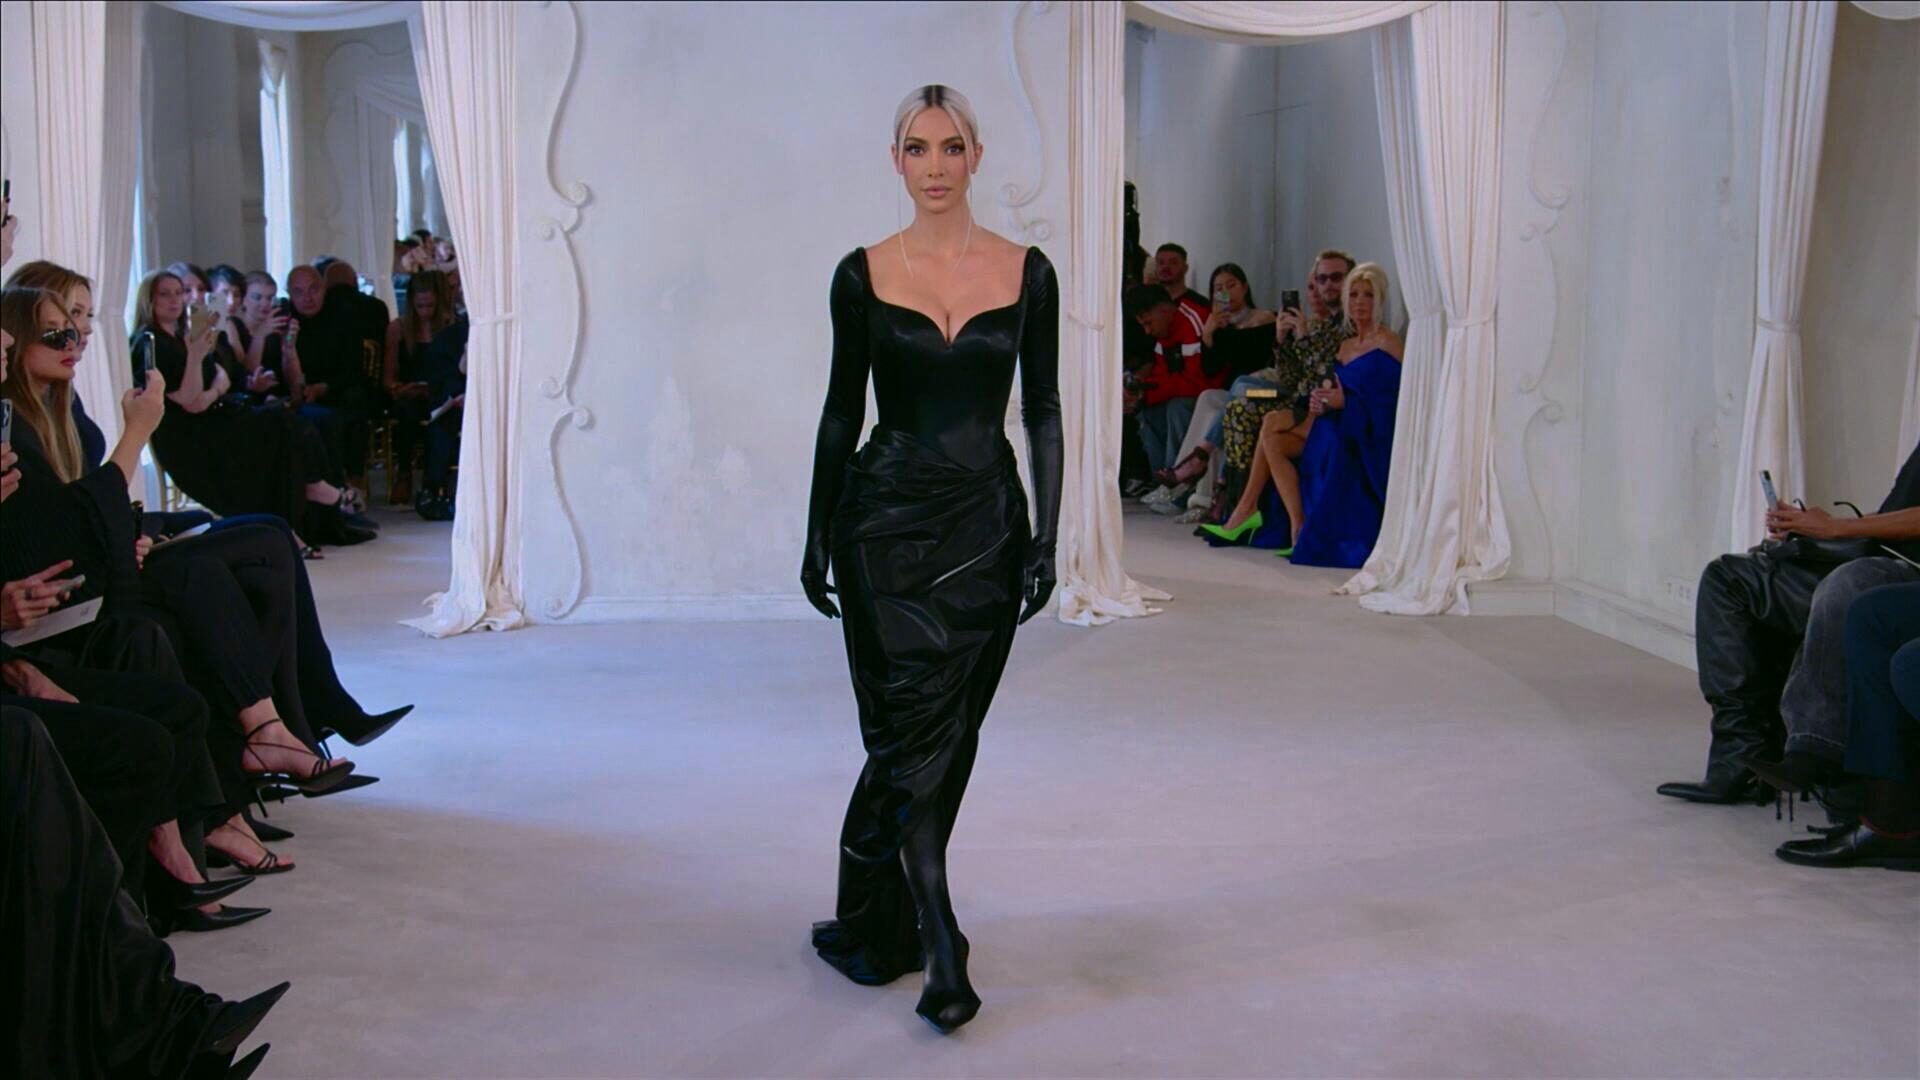 Kim Kardashian will join Emma Roberts in the upcoming season 12 of American Horror Story, entitled Delicate.